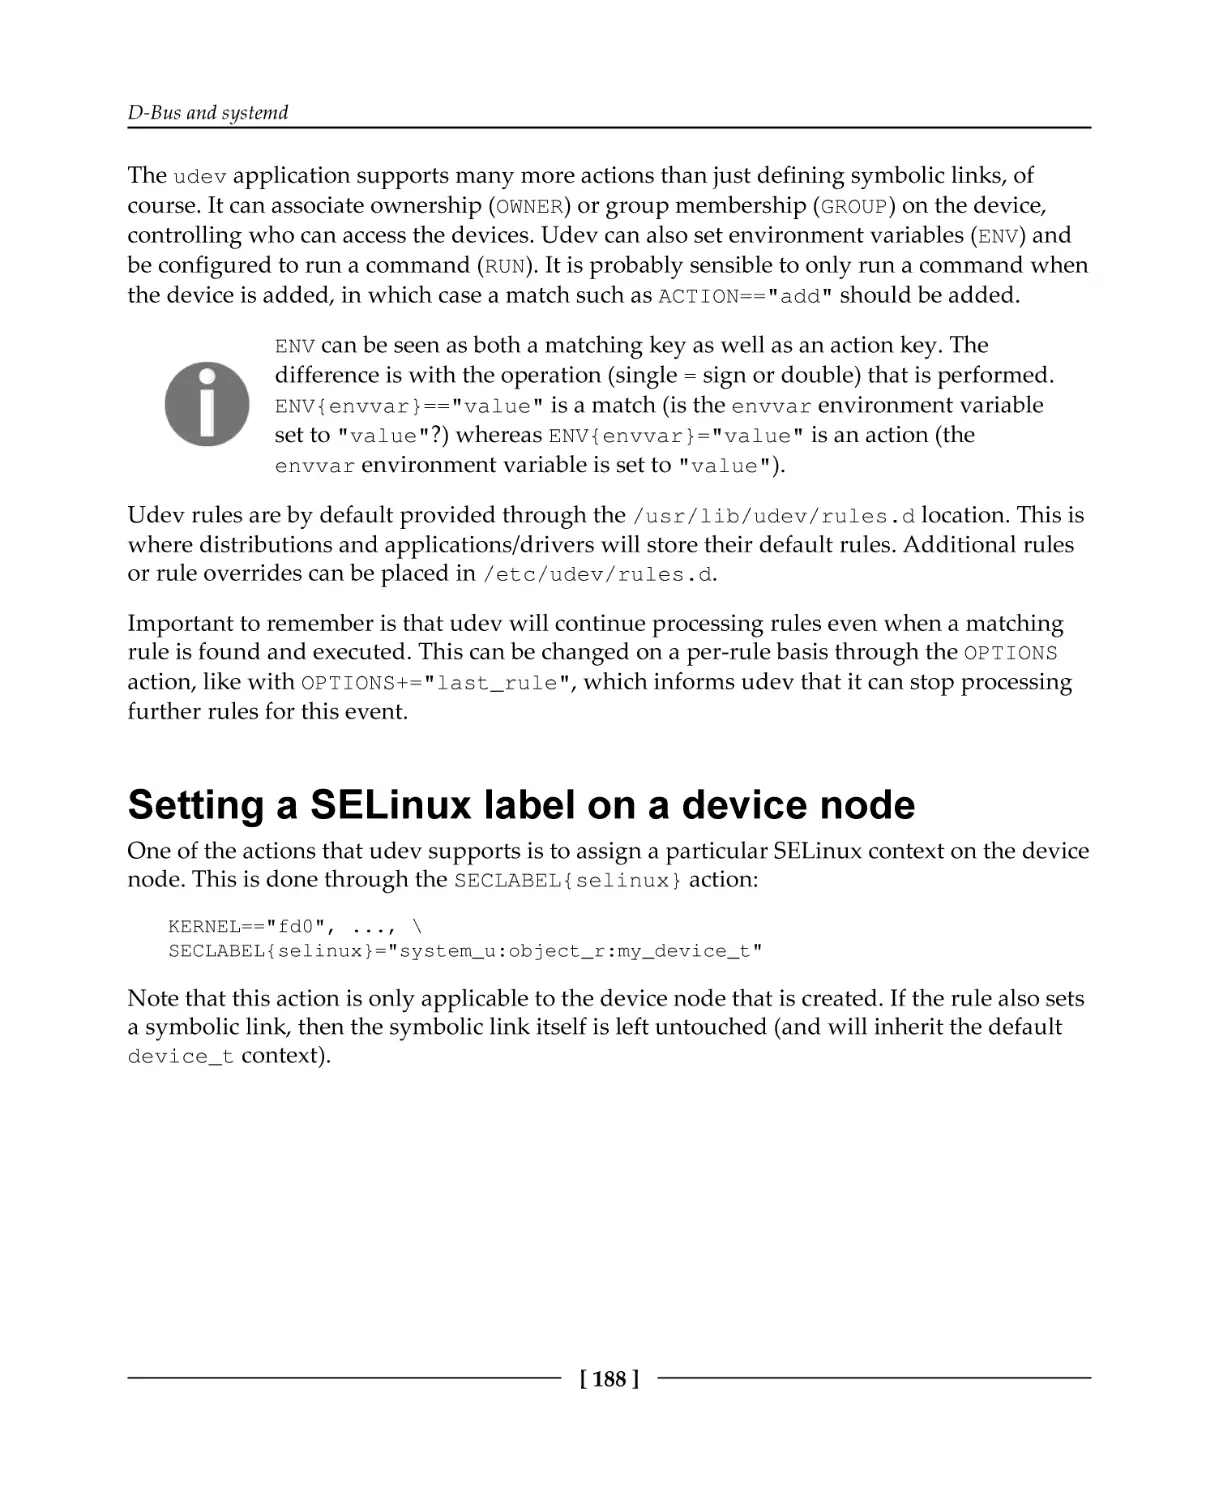 Setting a SELinux label on a device node